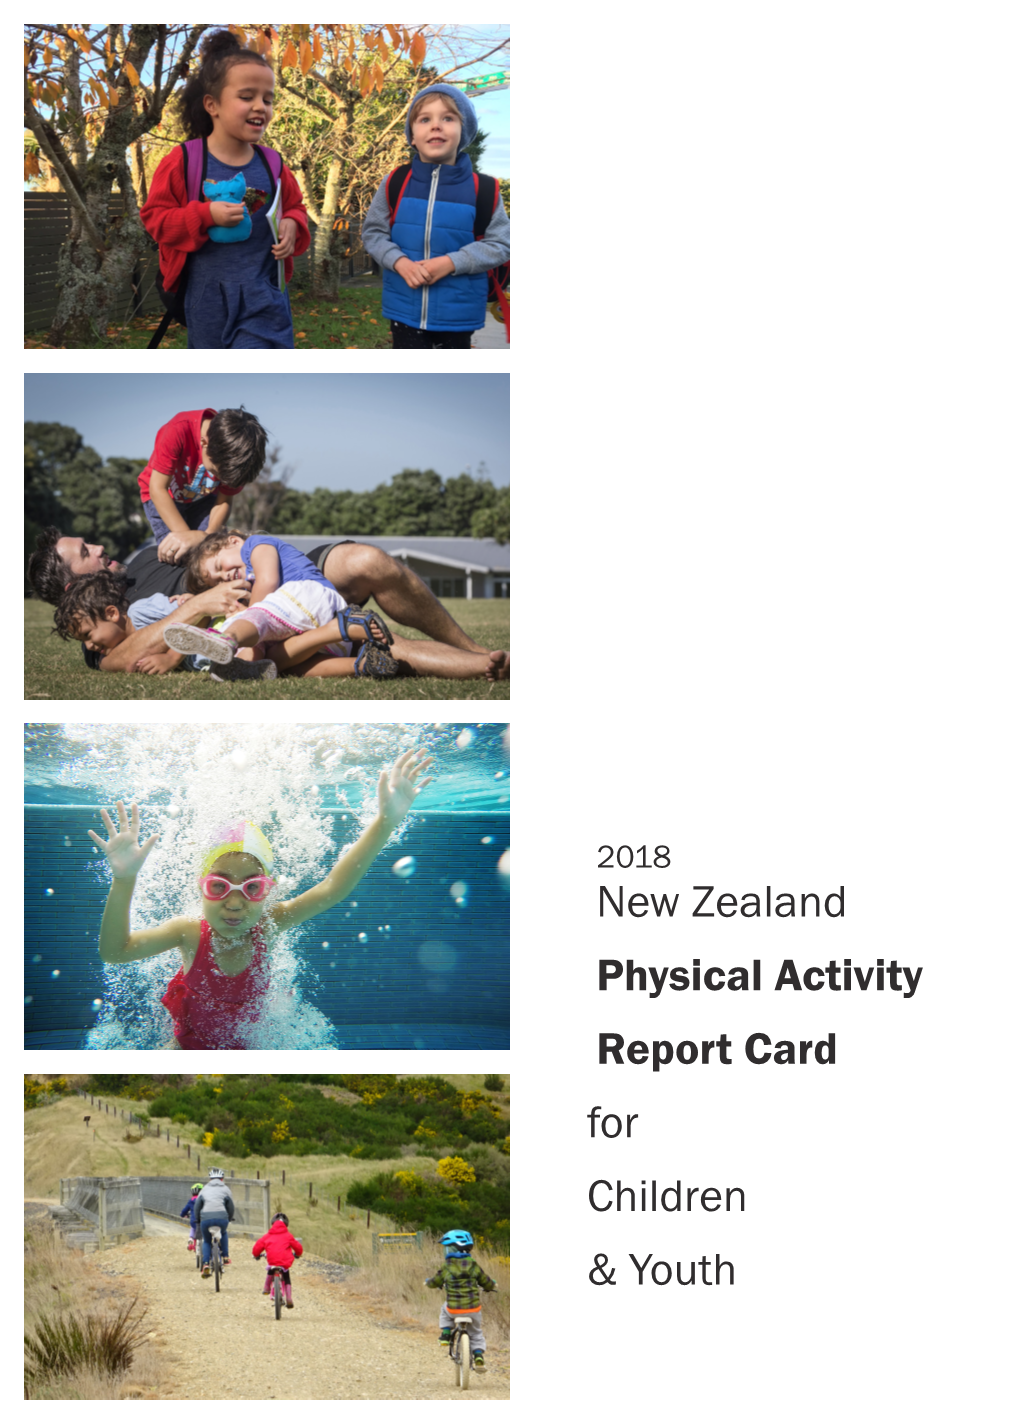 New Zealand Physical Activity Report Card for Children & Youth